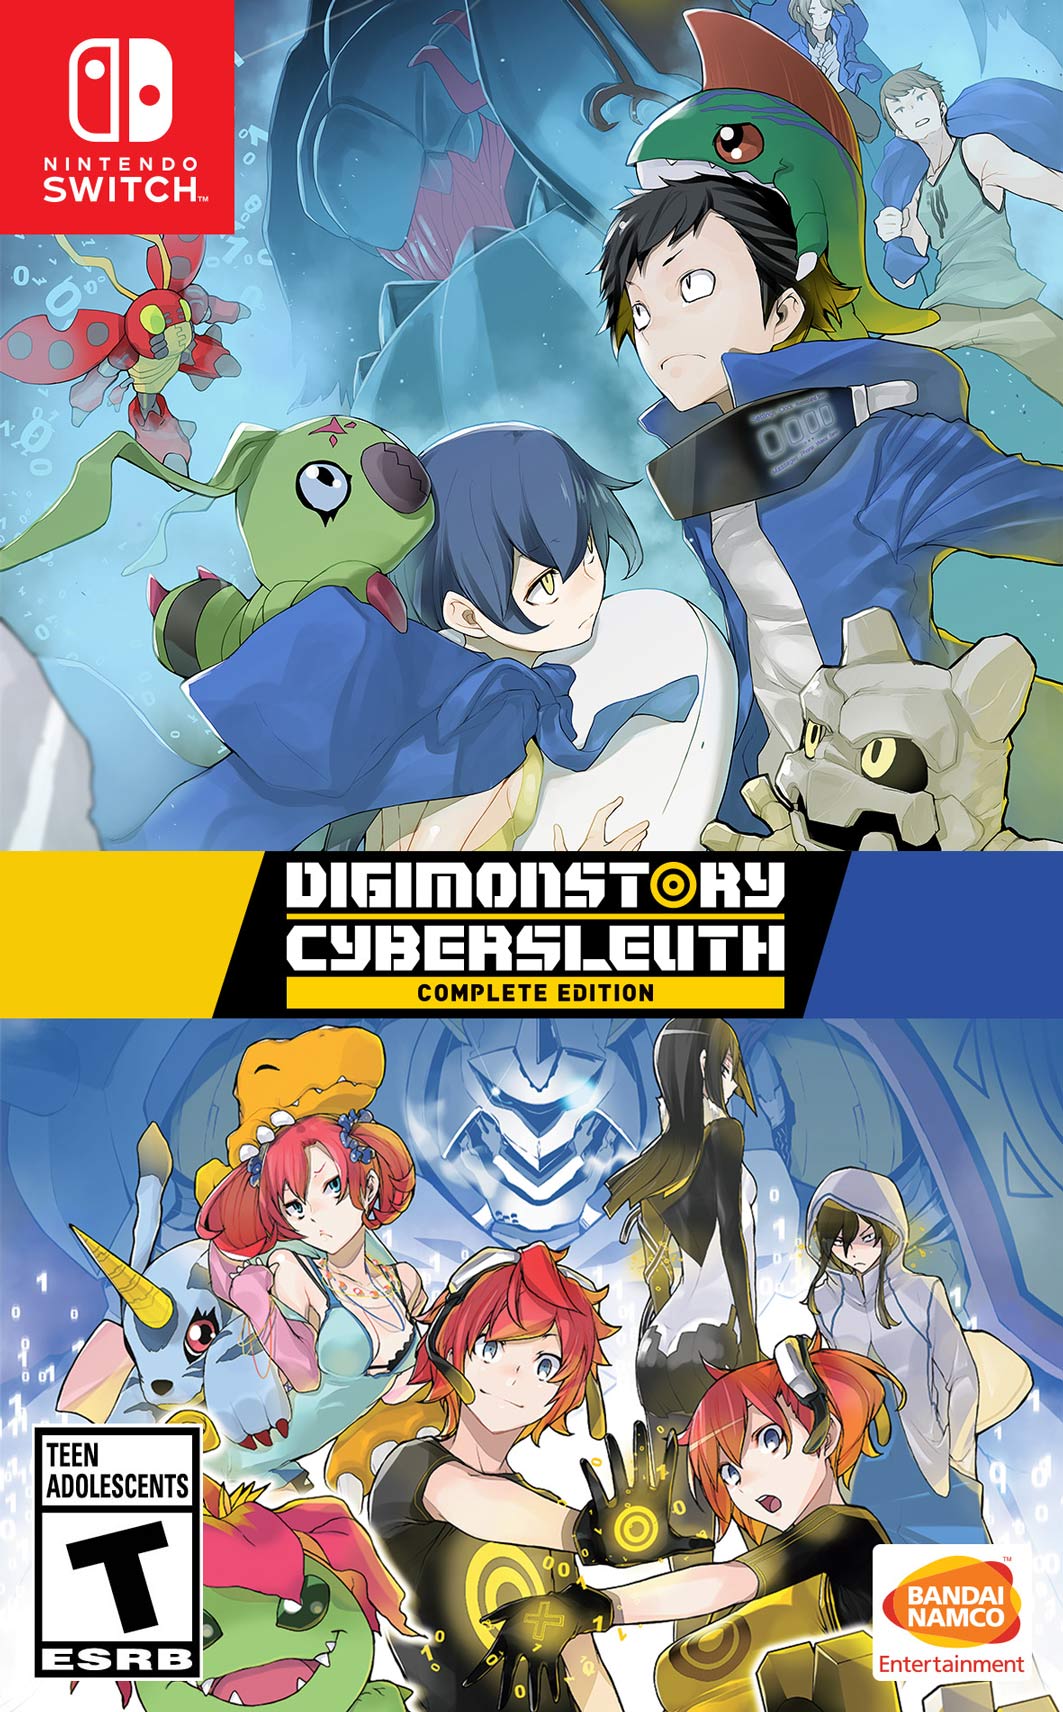 rent Udførelse gør ikke Digi on Twitter: "Would recommend Digimon Cyber Sleuth to anyone is curious  or new to the Digimon franchise, the characters are great, the combat  system has a triangle similar to FE weapons